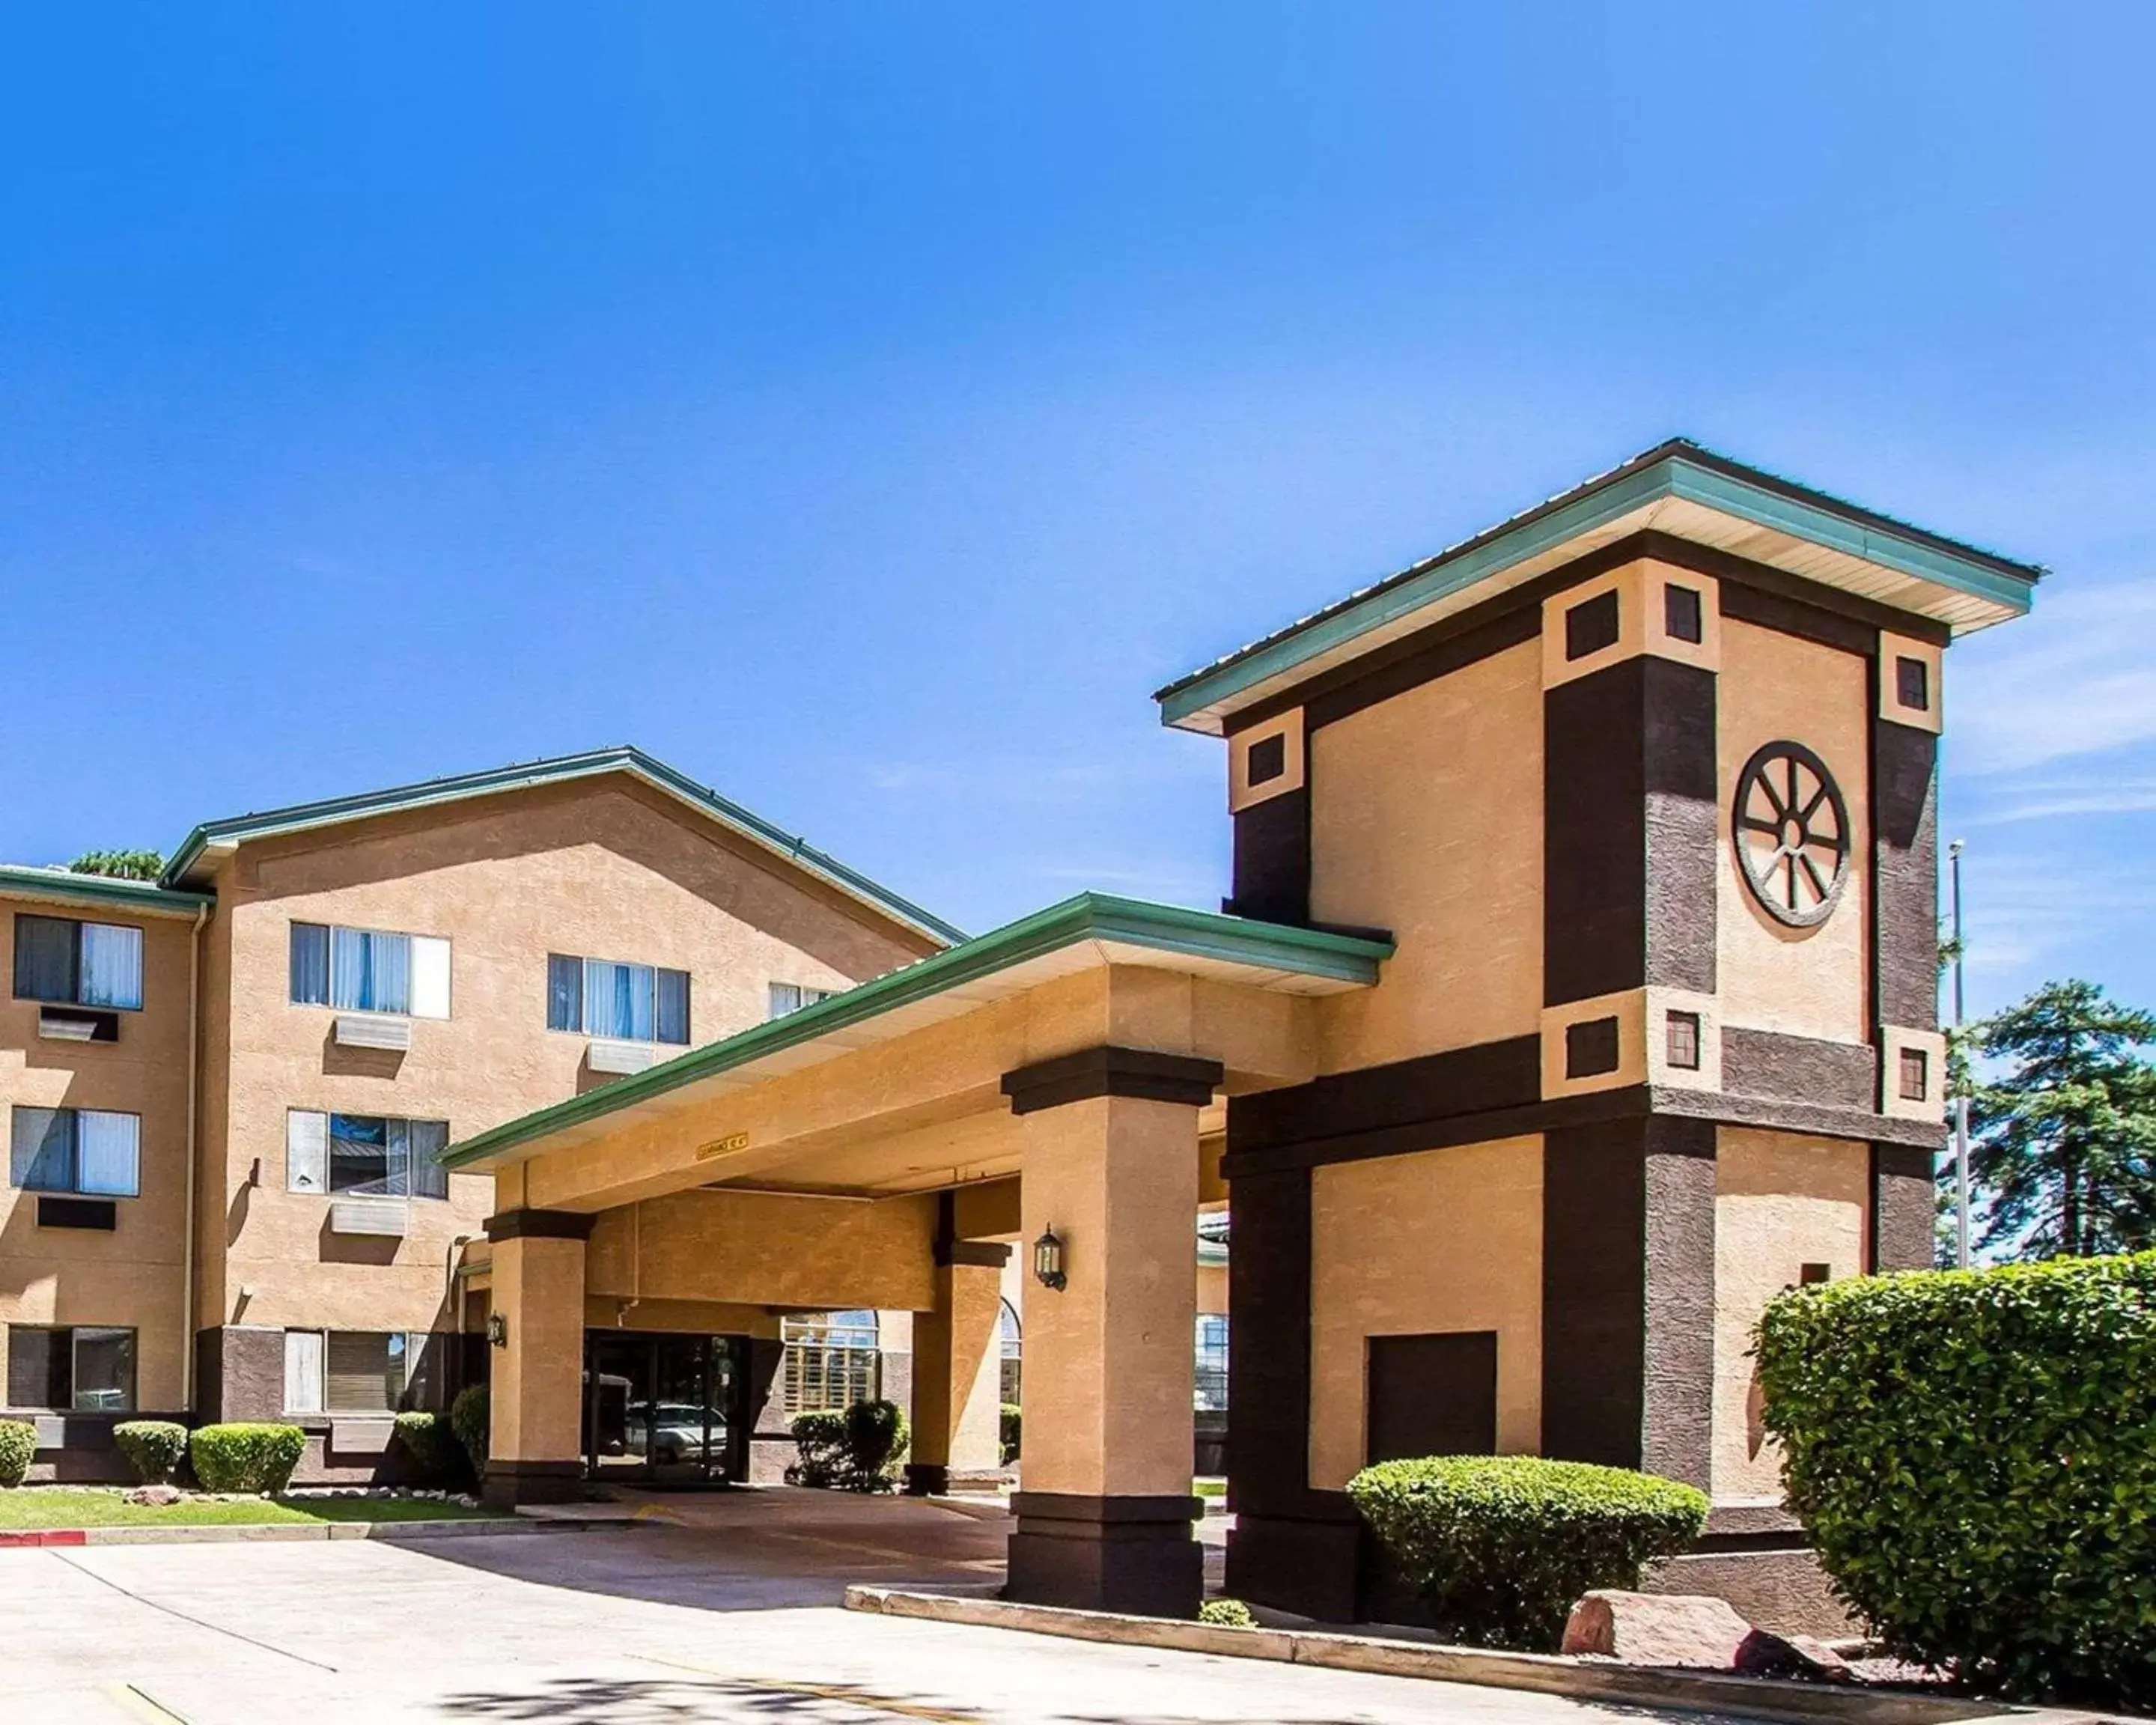 Property building in Comfort Inn Payson